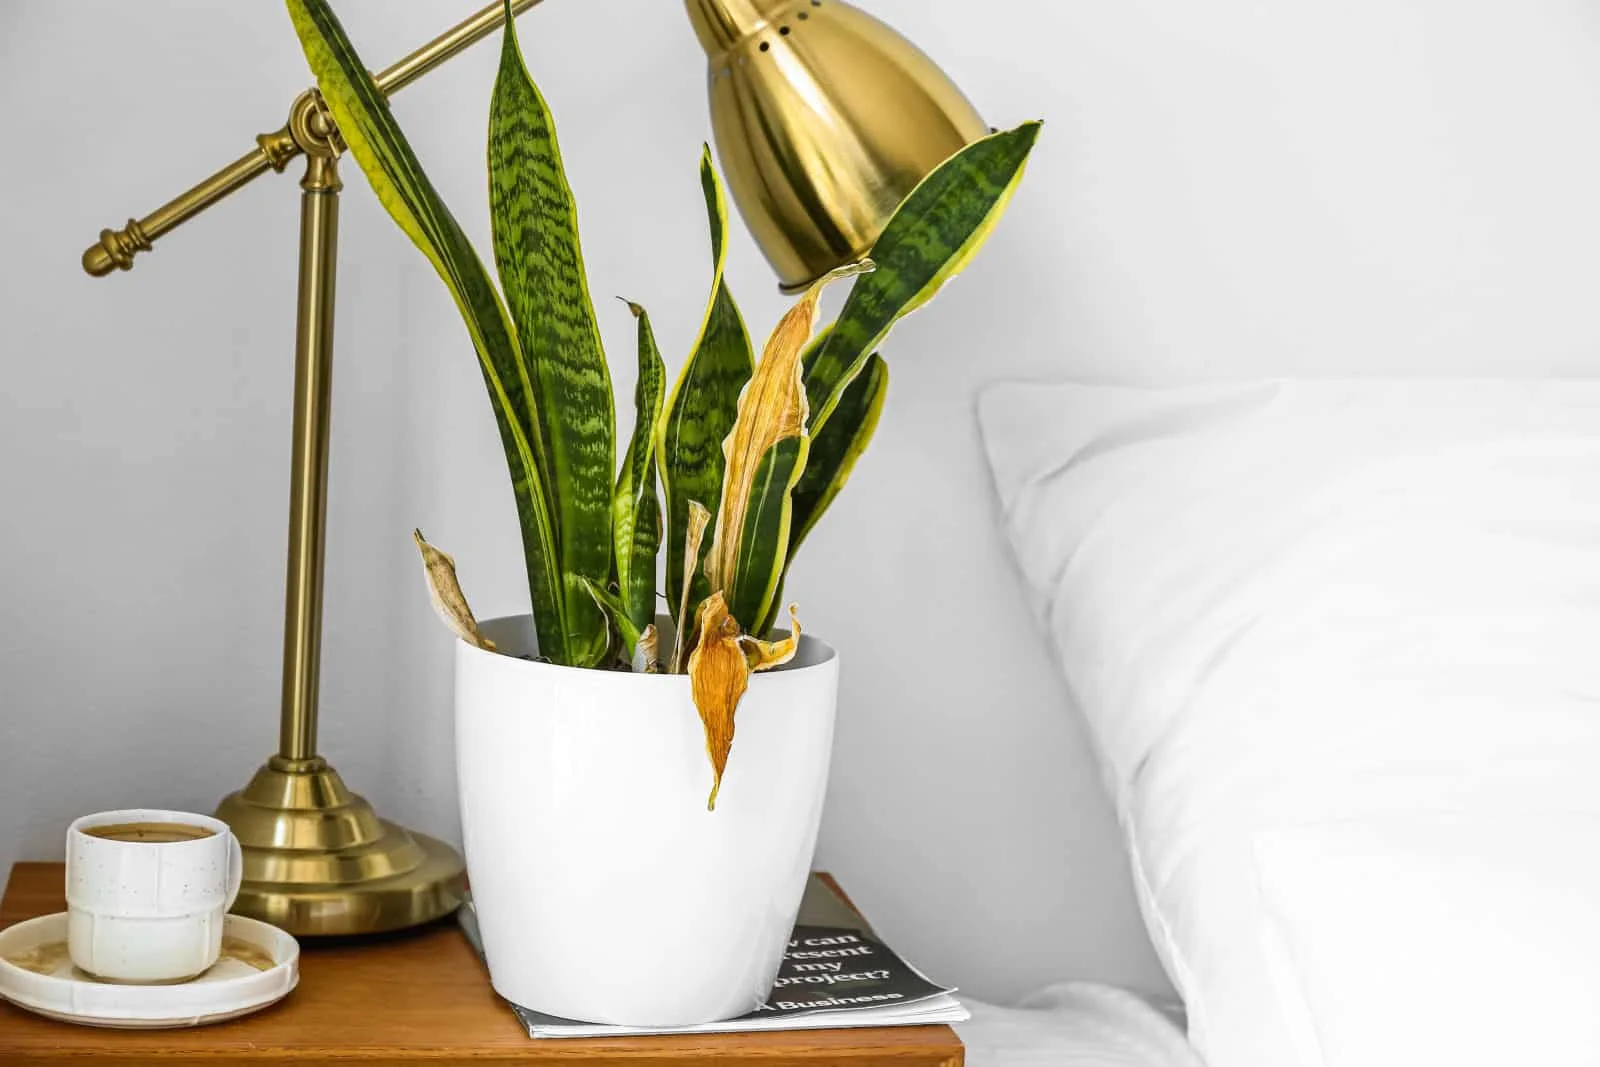 Wilted houseplant, lamp and cup of coffee on table near light wall in bedroom